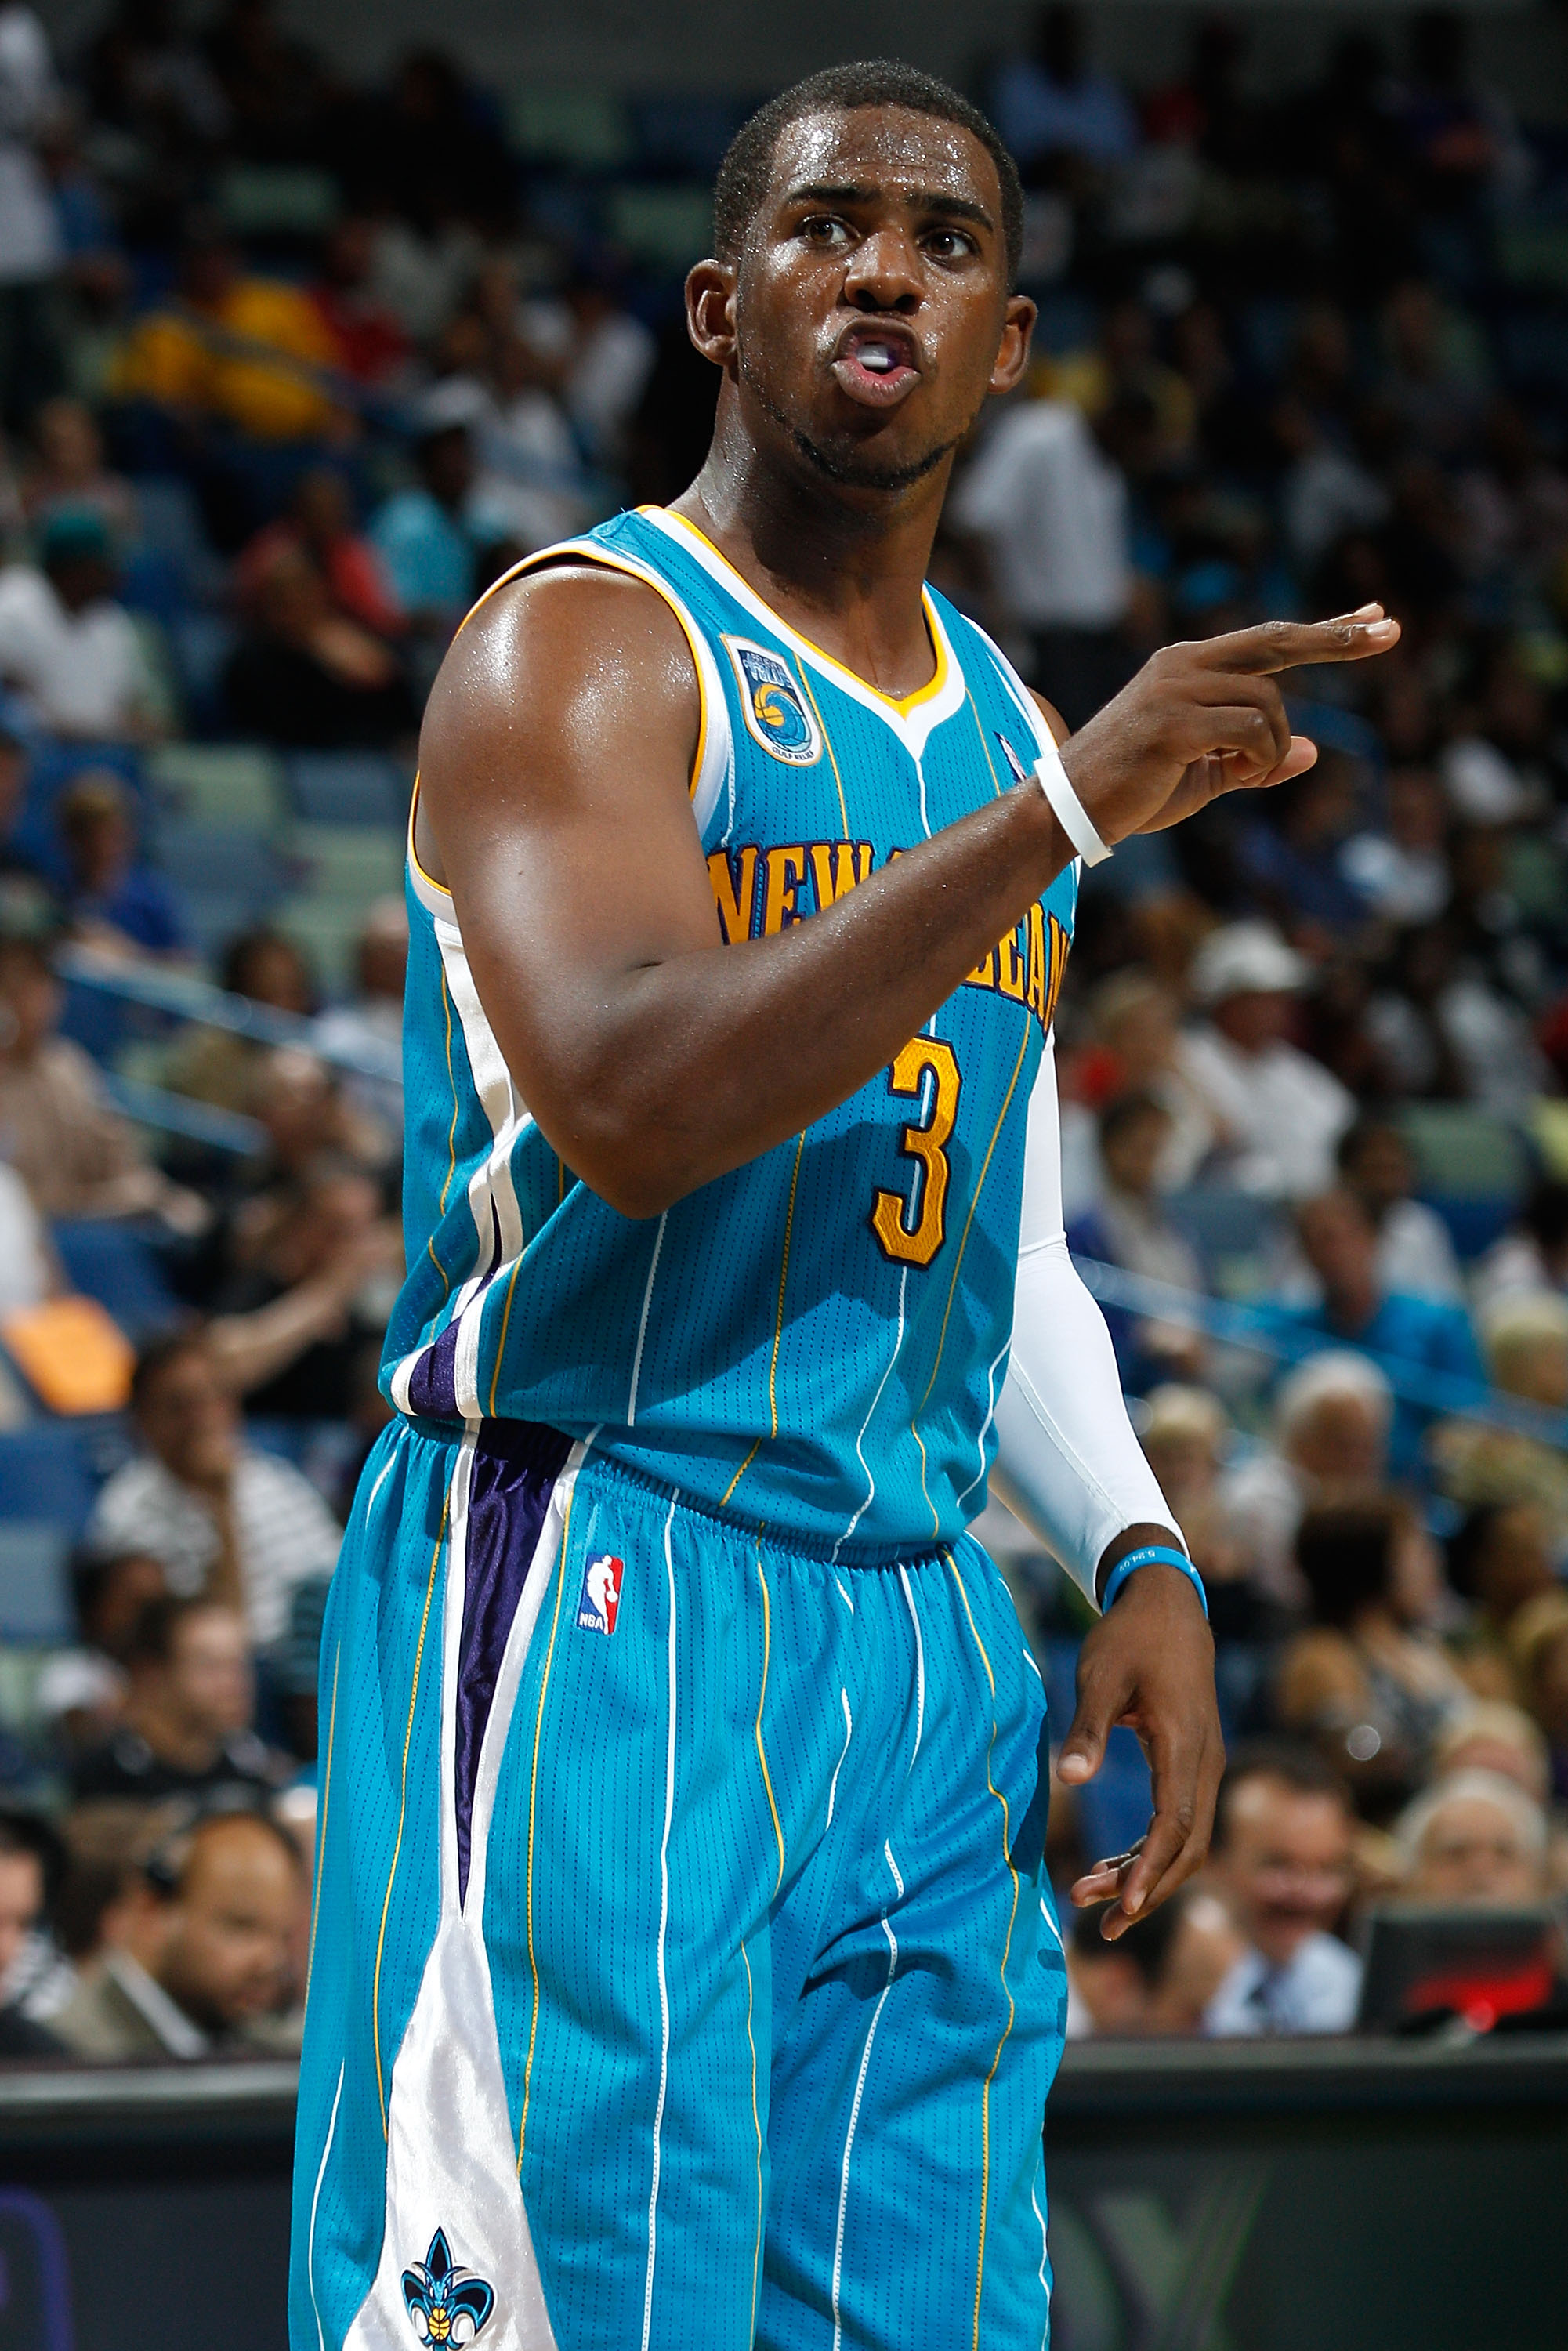 NEW ORLEANS - OCTOBER 13:  Chris Paul #3 of the New Orleans Hornets in action during the game against the Miami Heat at the New Orleans Arena on October 13, 2010 in New Orleans, Louisiana.  NOTE TO USER: User expressly acknowledges and agrees that, by dow